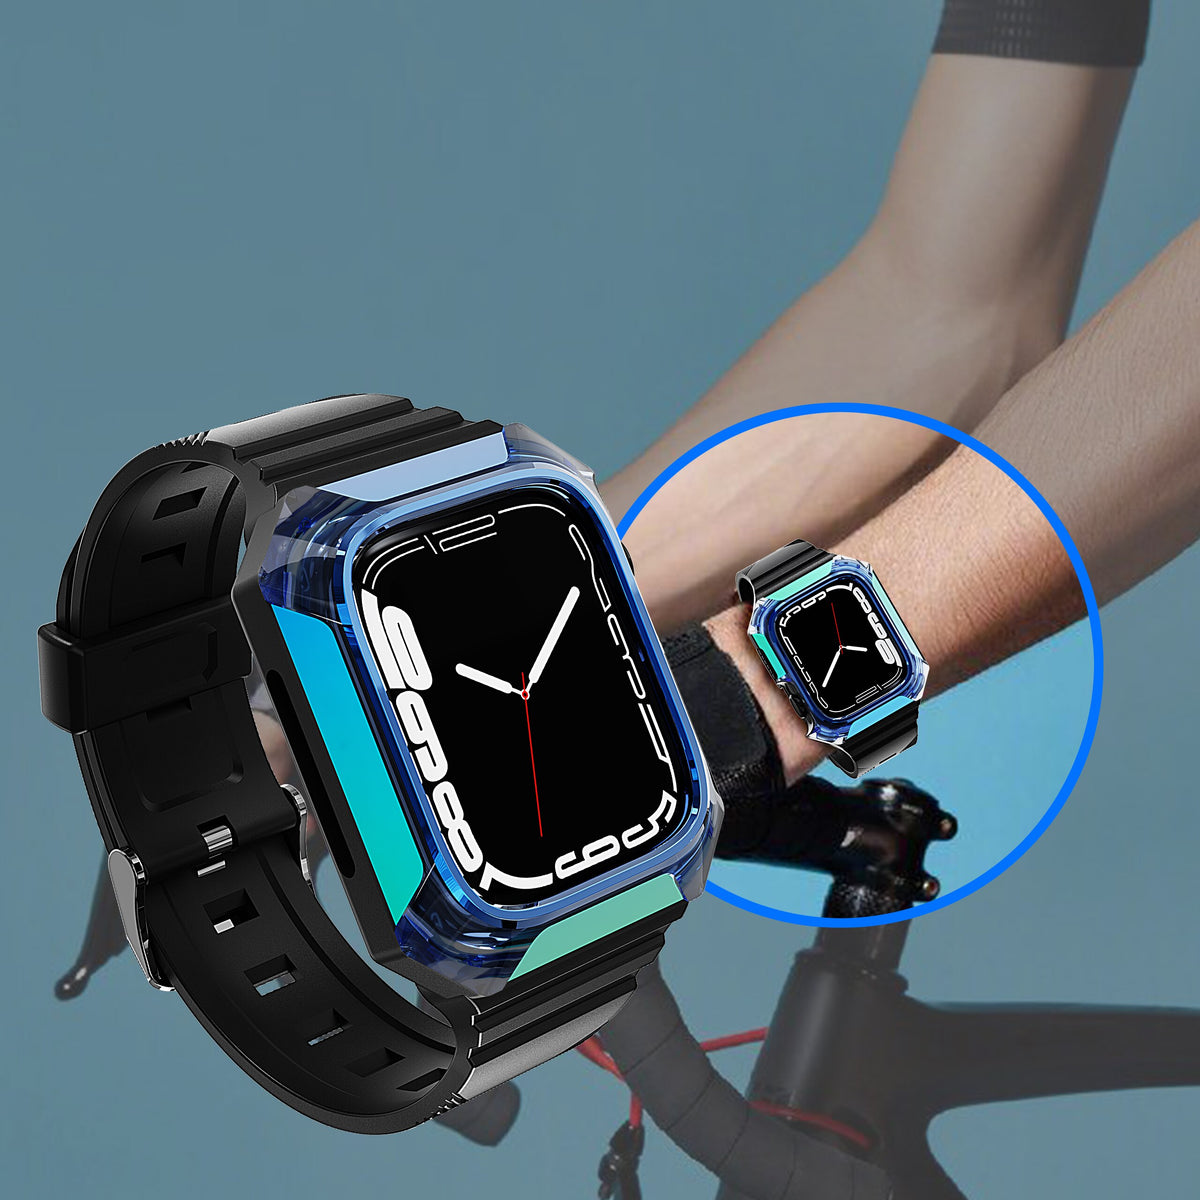 Case+Strap for Apple Watch Band